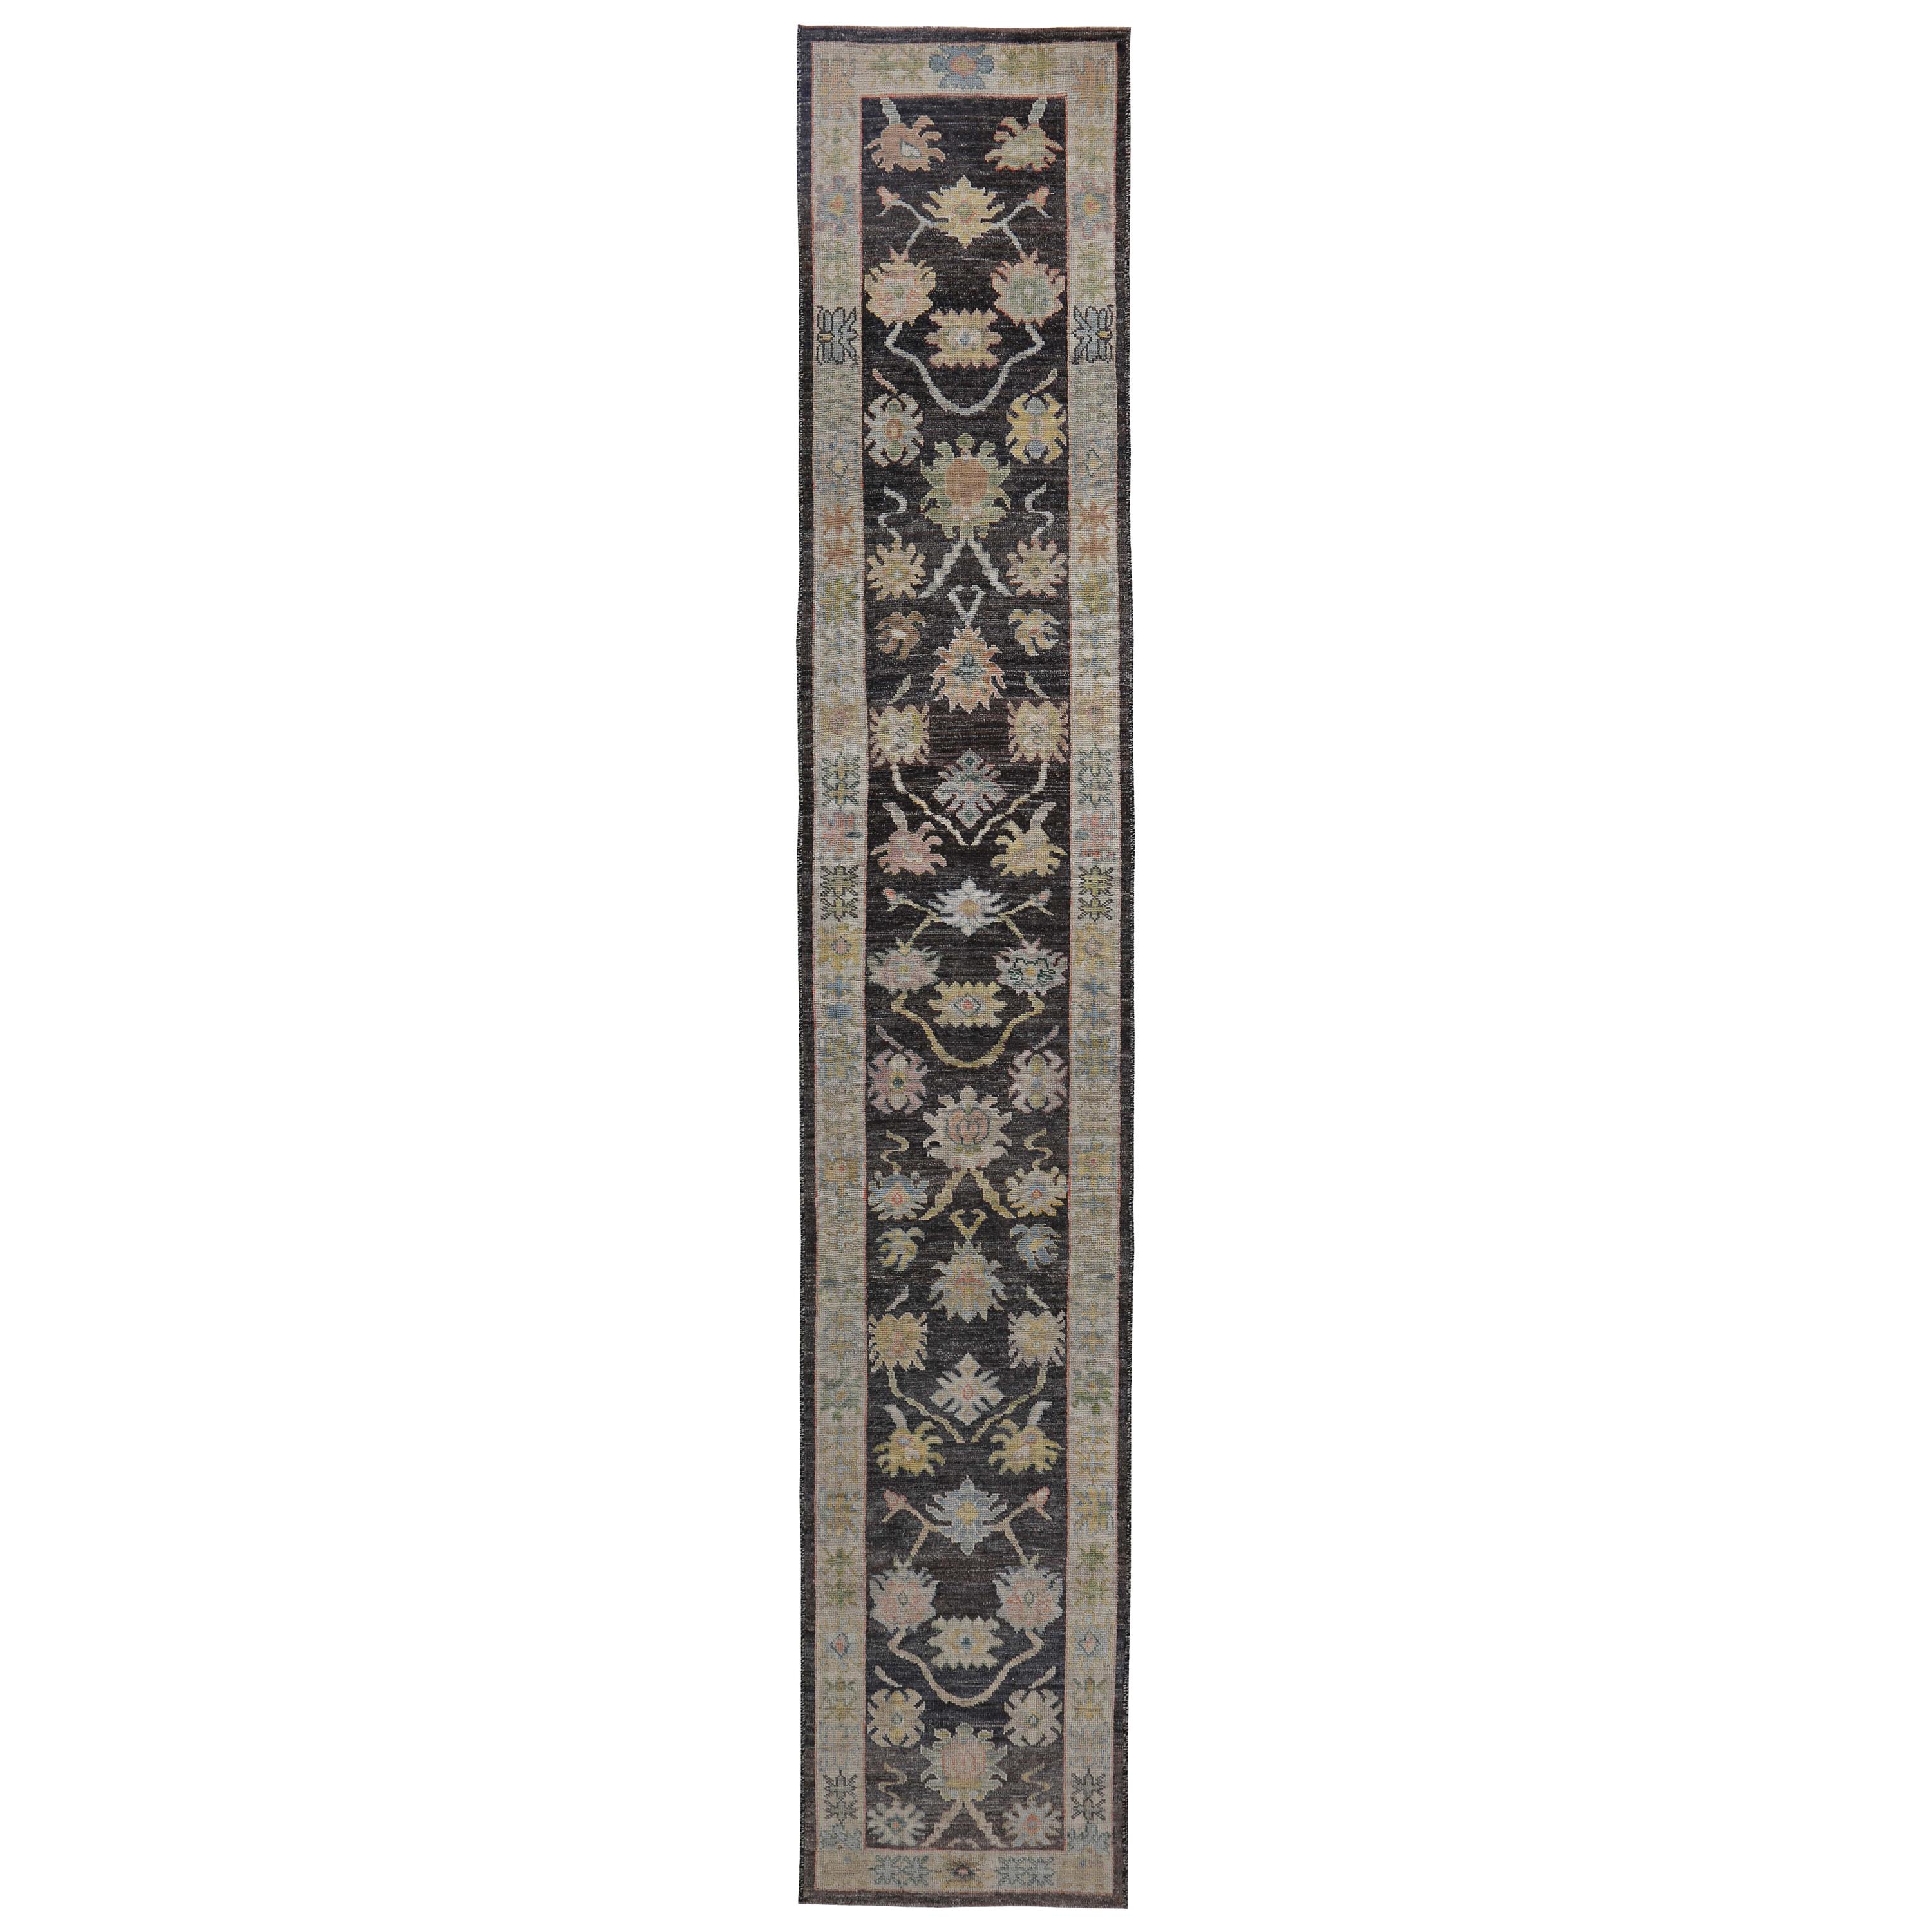 Turkish Oushak Runner Rug with Colorful Flower Heads on Brown and Ivory Field